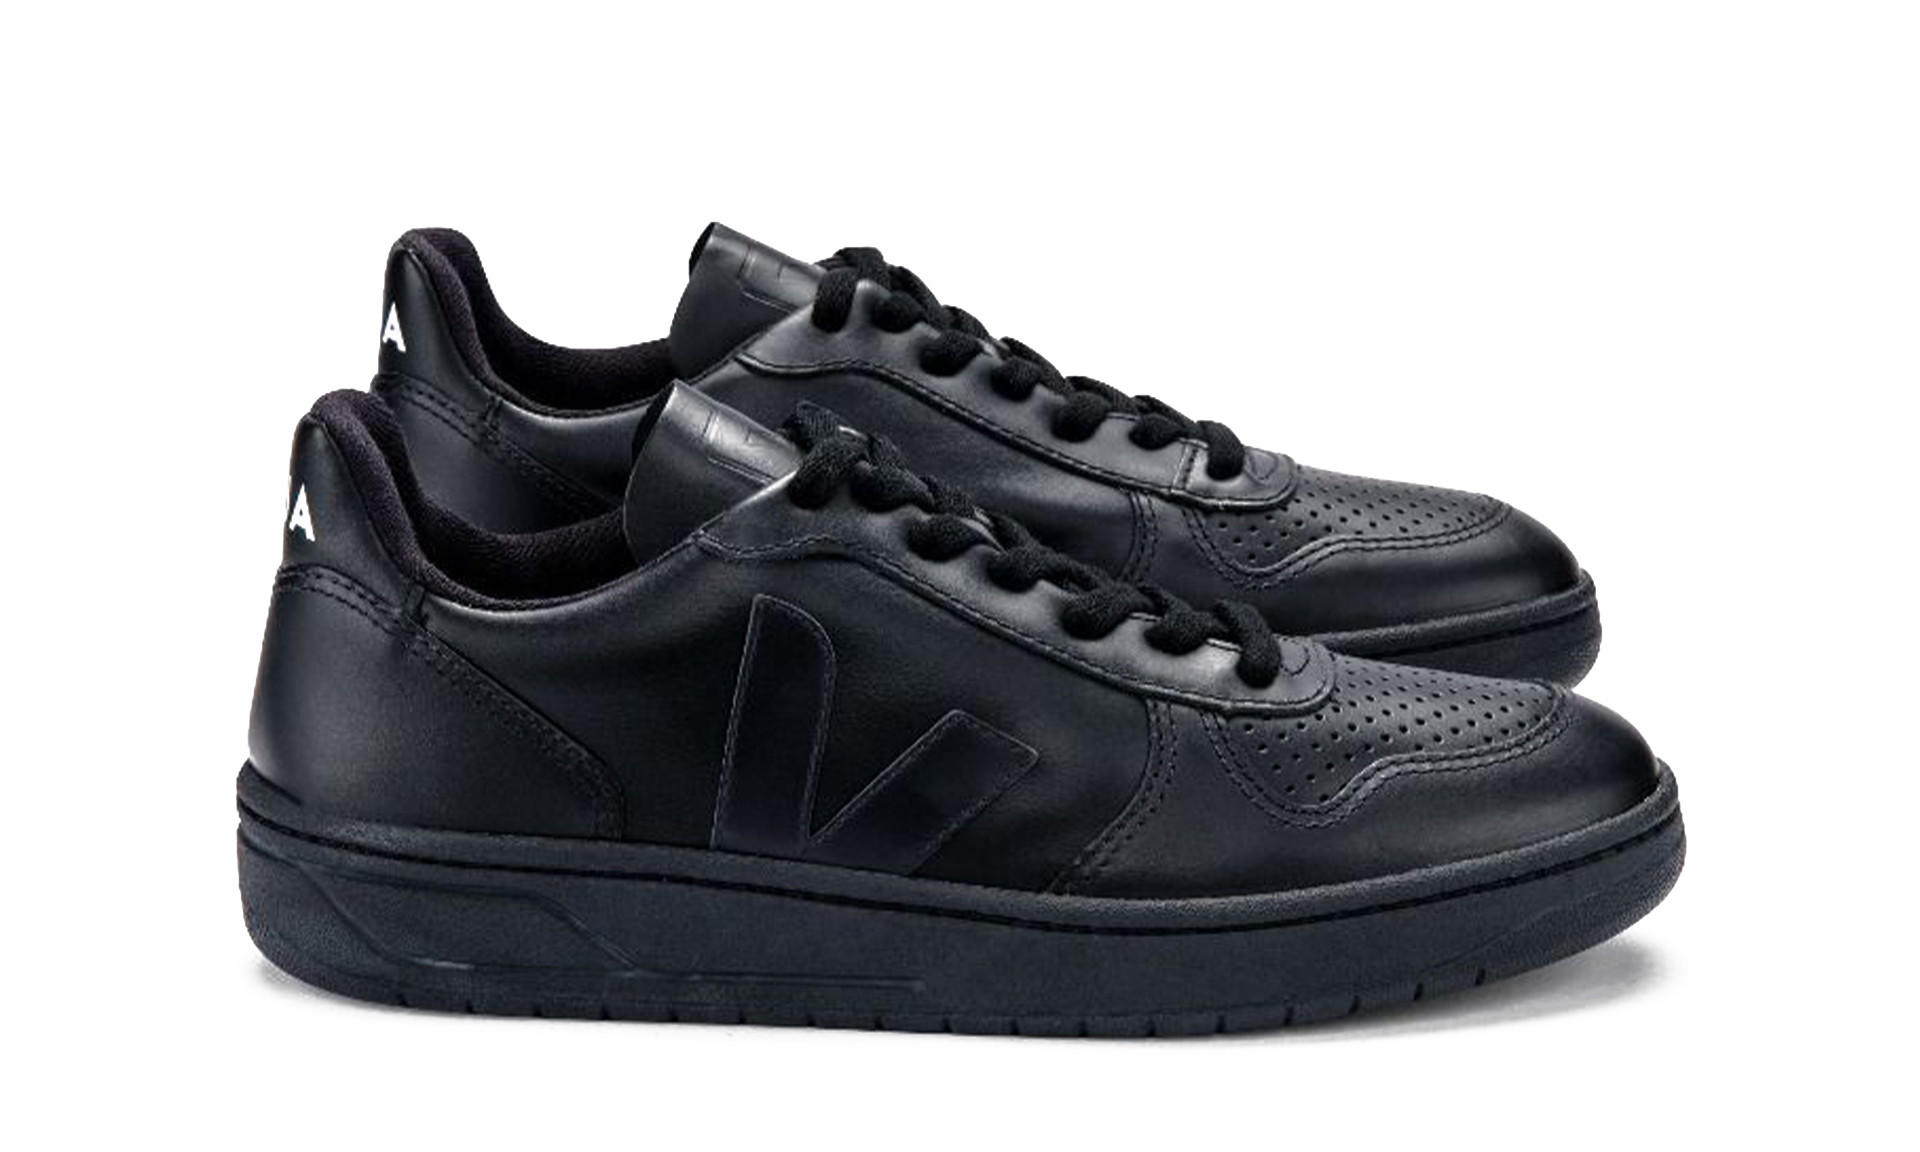 Miky | Men's Sneakers | Black Leather | Bally